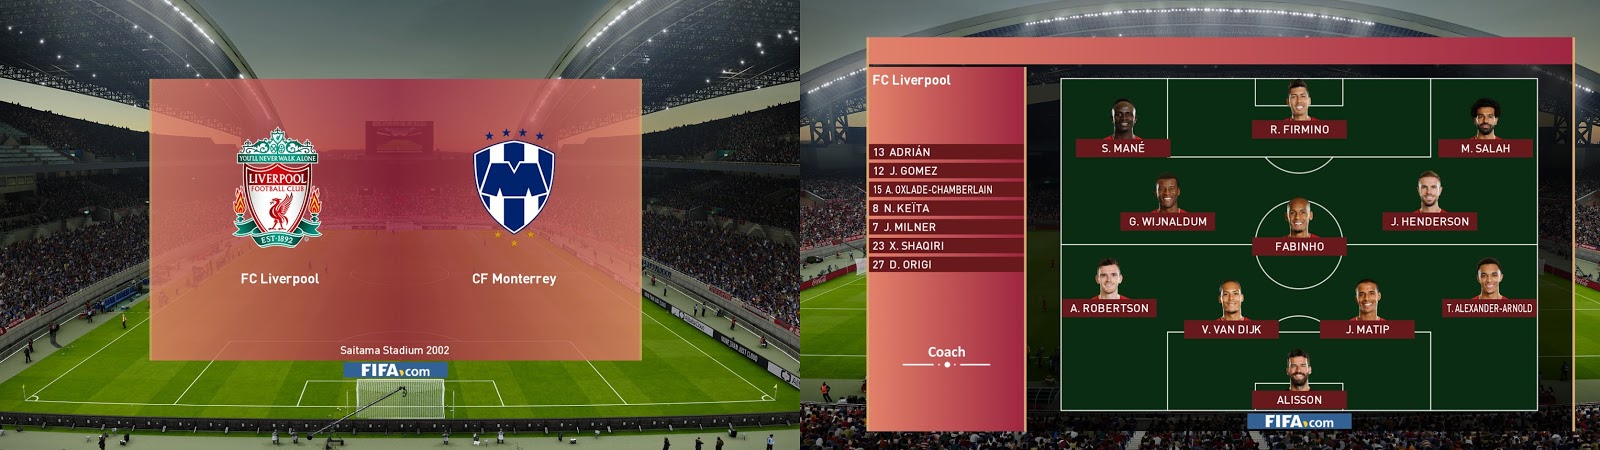 Pes 2020 Scoreboard Fifa Club World Cup By 1002mb